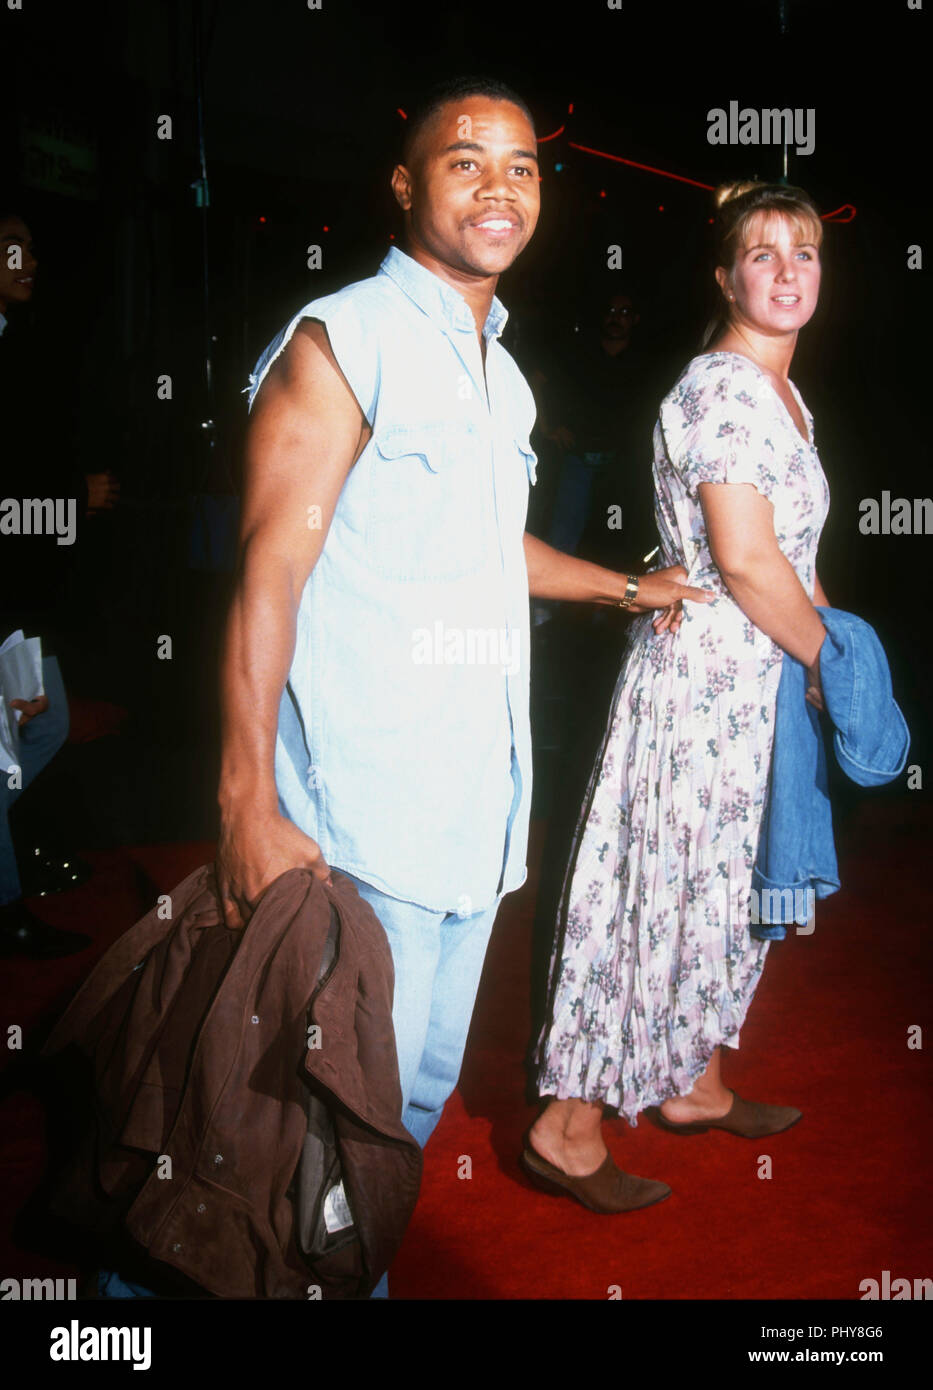 HOLLYWOOD, CA - SEPTEMBER 8: Actor Cuba Gooding Jr. and wife Sara Kapfer attends the premiere of New Line Cinema's 'Where The Day Takes You' on September 8, 1992 at Mann's Chinese Theatre in Hollywood, California. Photo by Barry King/Alamy Stock Photo Stock Photo